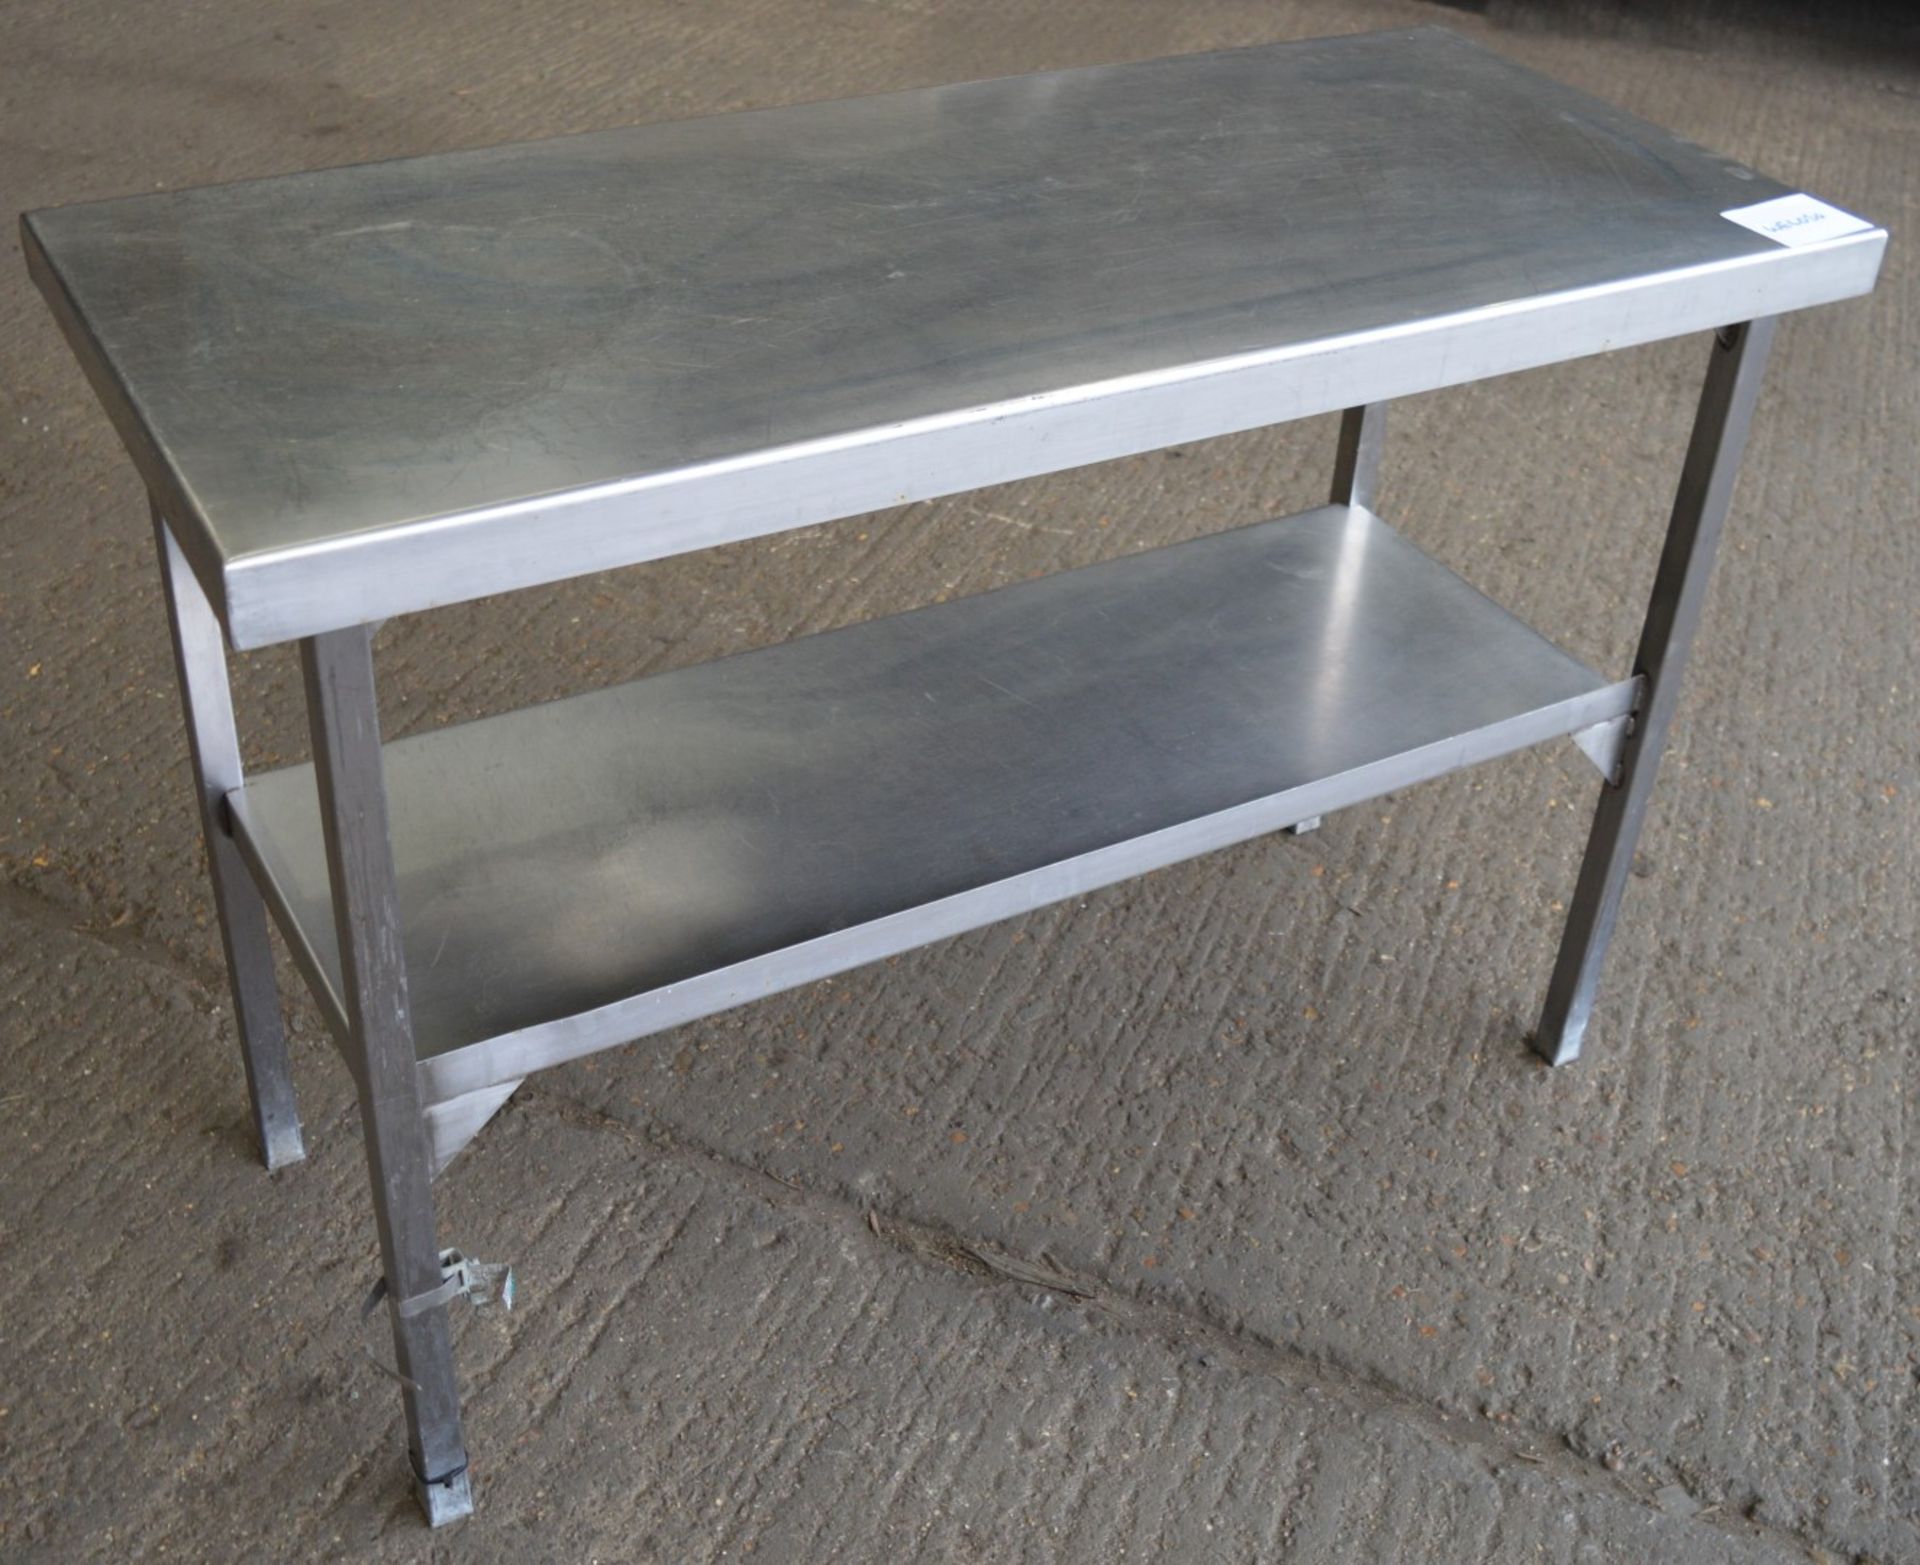 1 x Stainless Steel Commercial Kitchen Prep Bench With Undershelf - CL057 - H84 x W122 x D53 cms - - Image 2 of 3